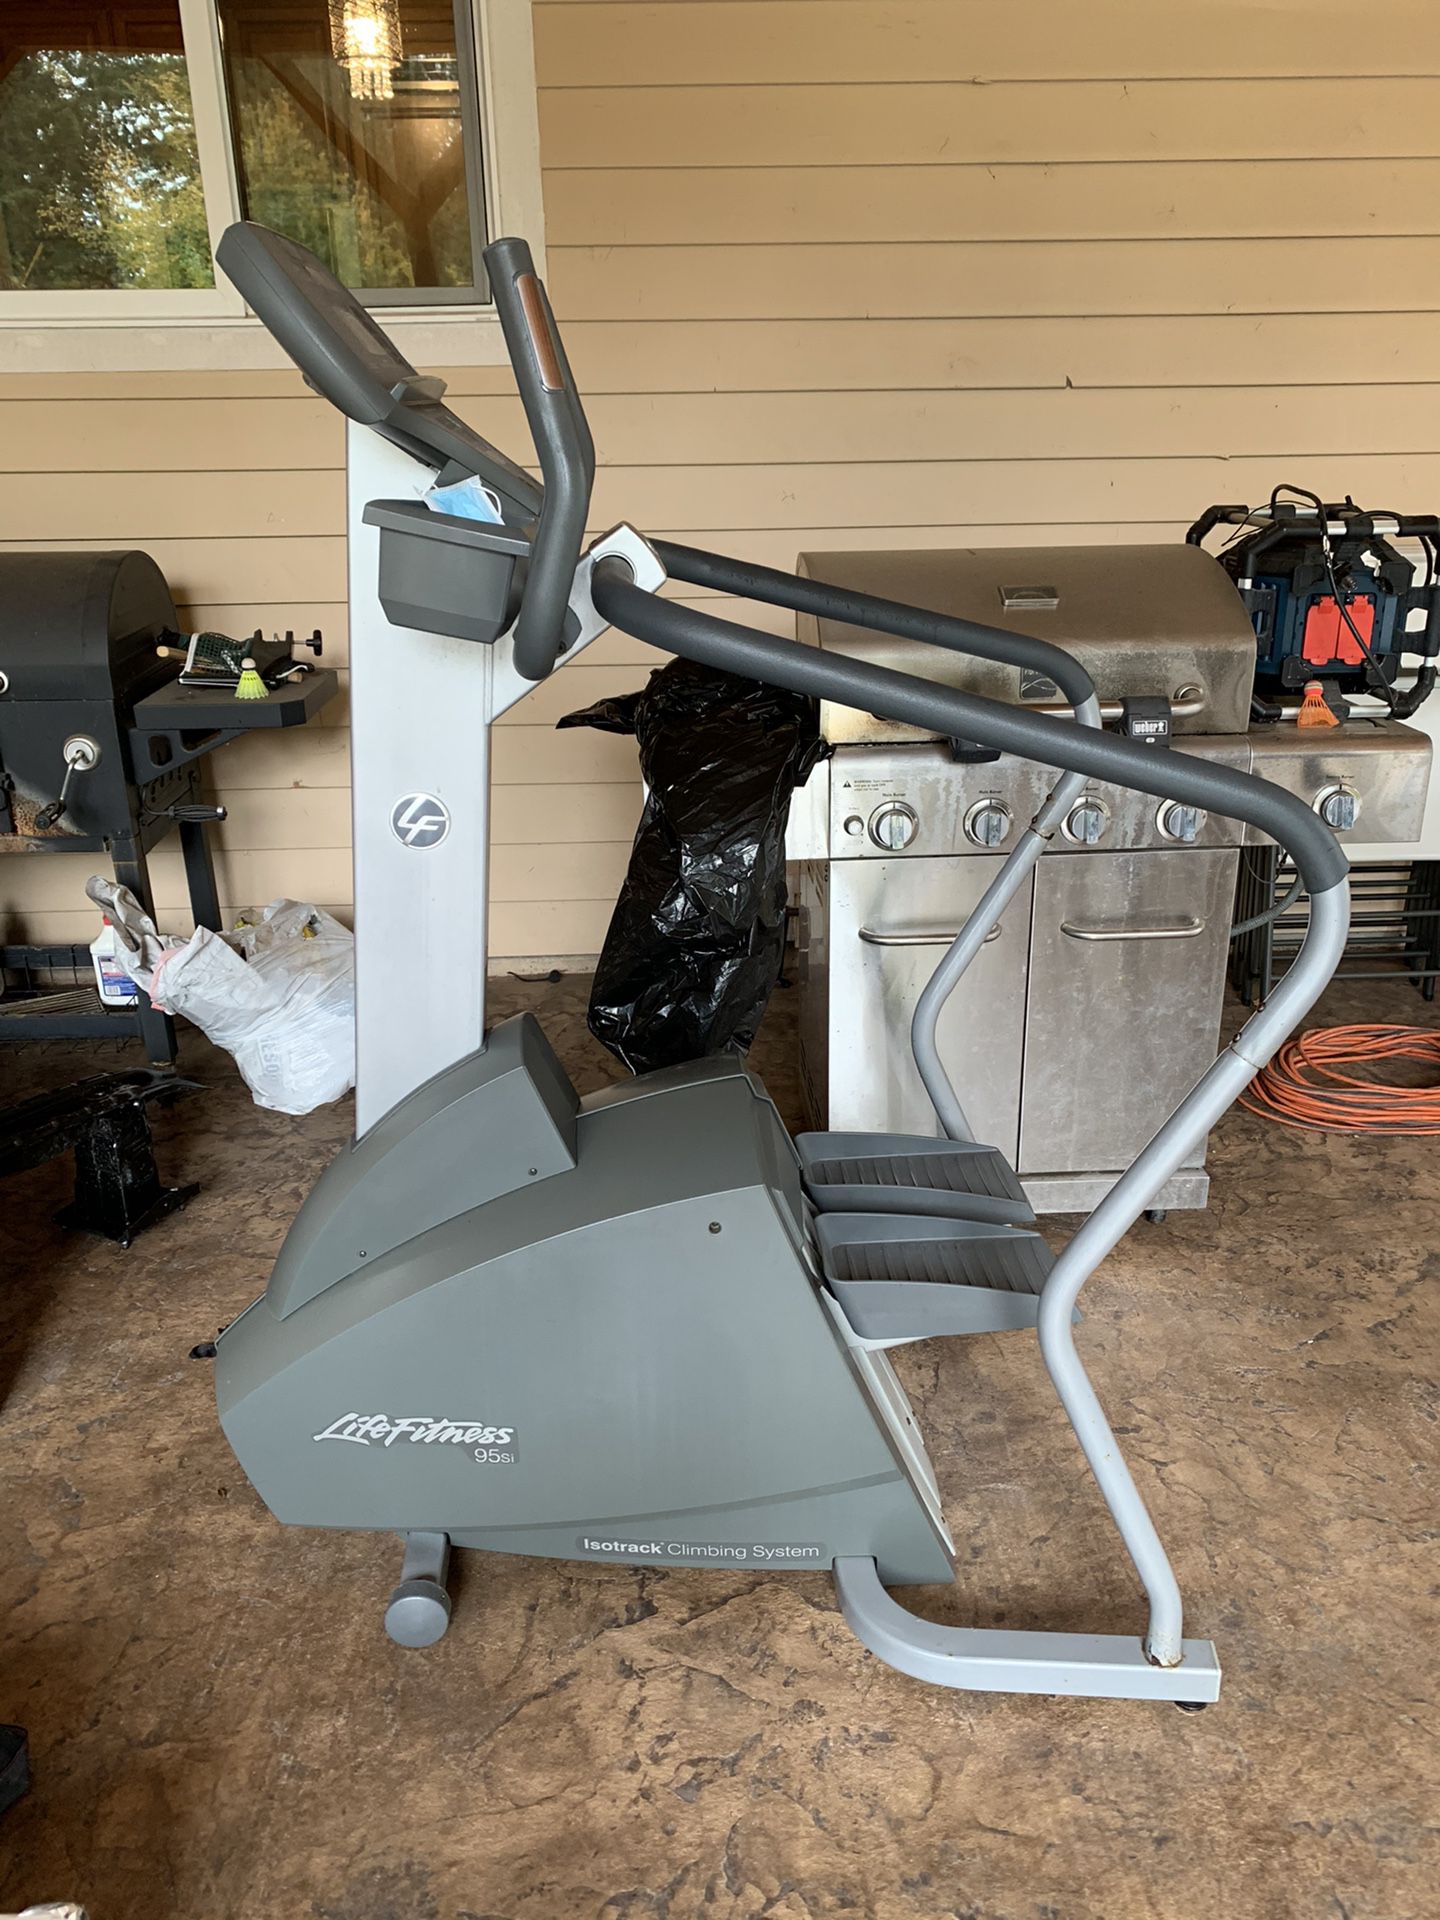 Life Fitness 95si stepper